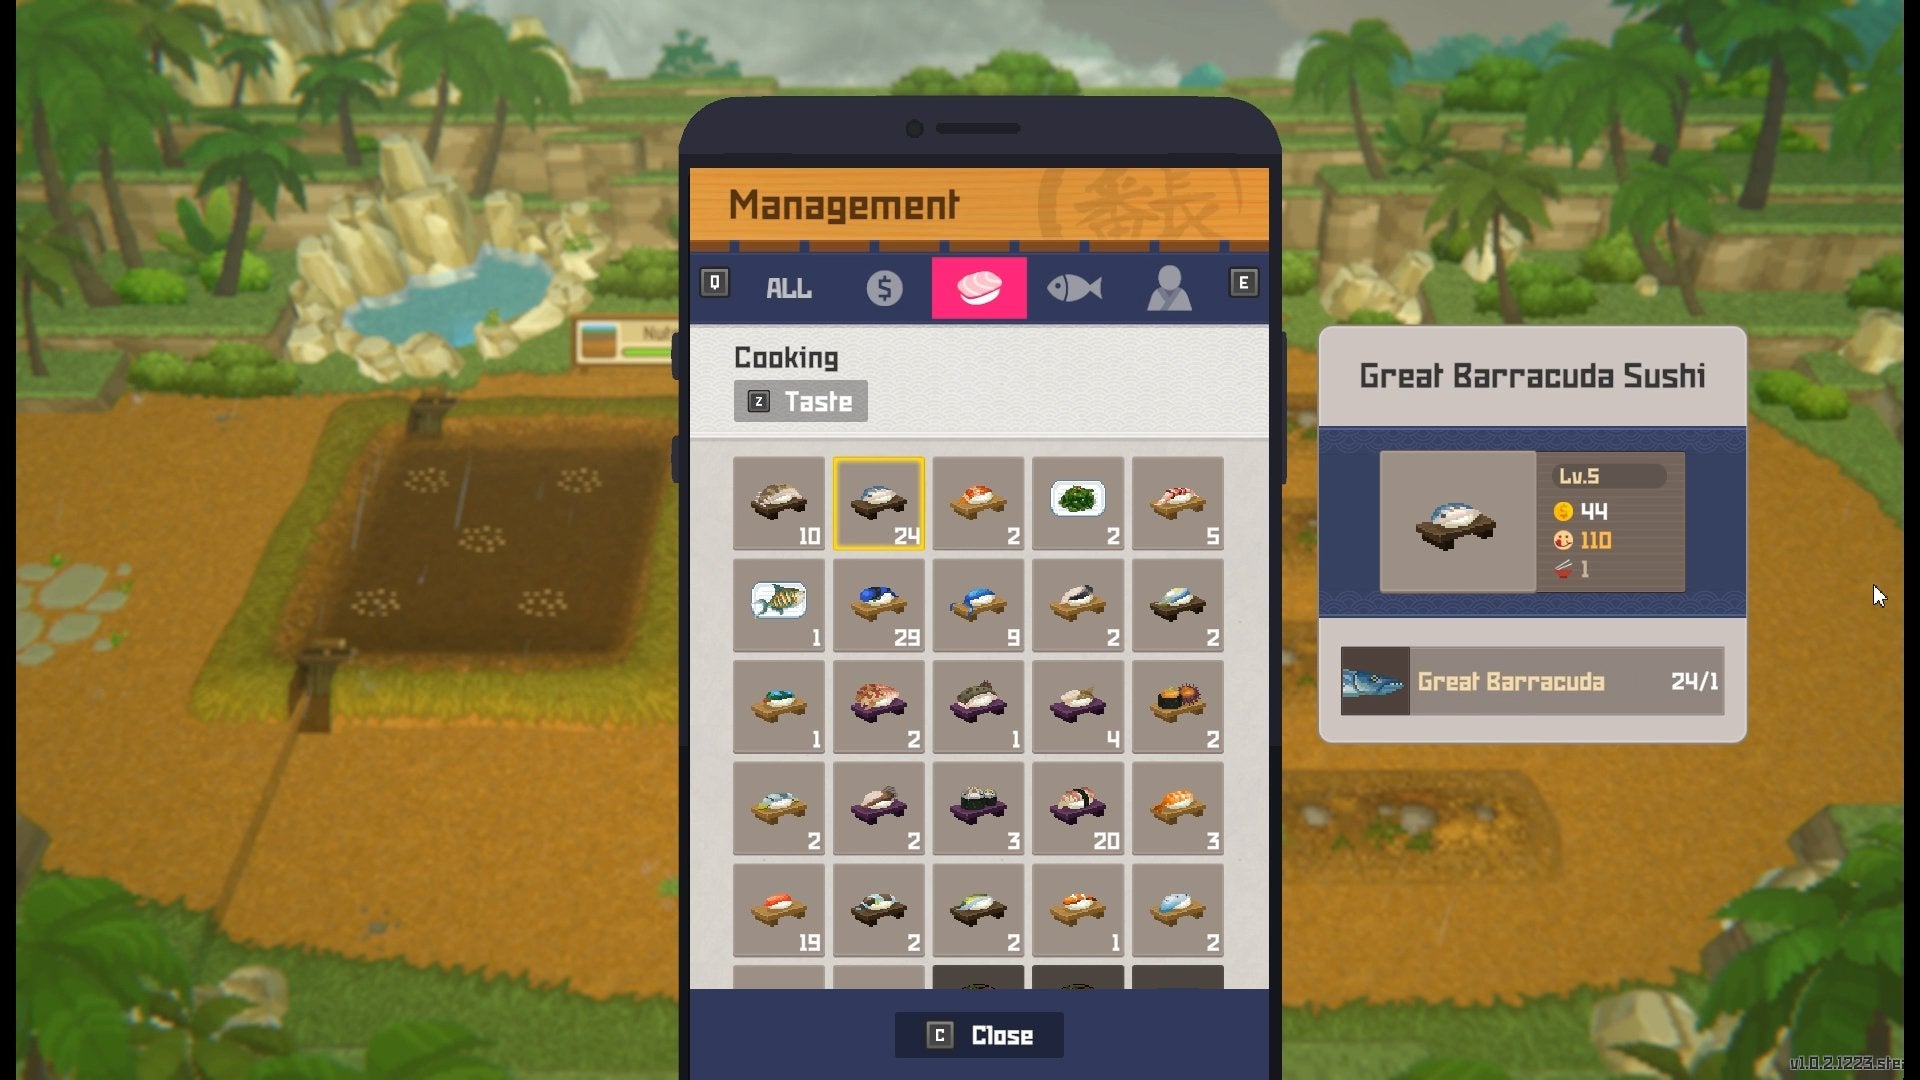 The recipe for Great Barracuda Sushi in the Management app in Dave the Diver.